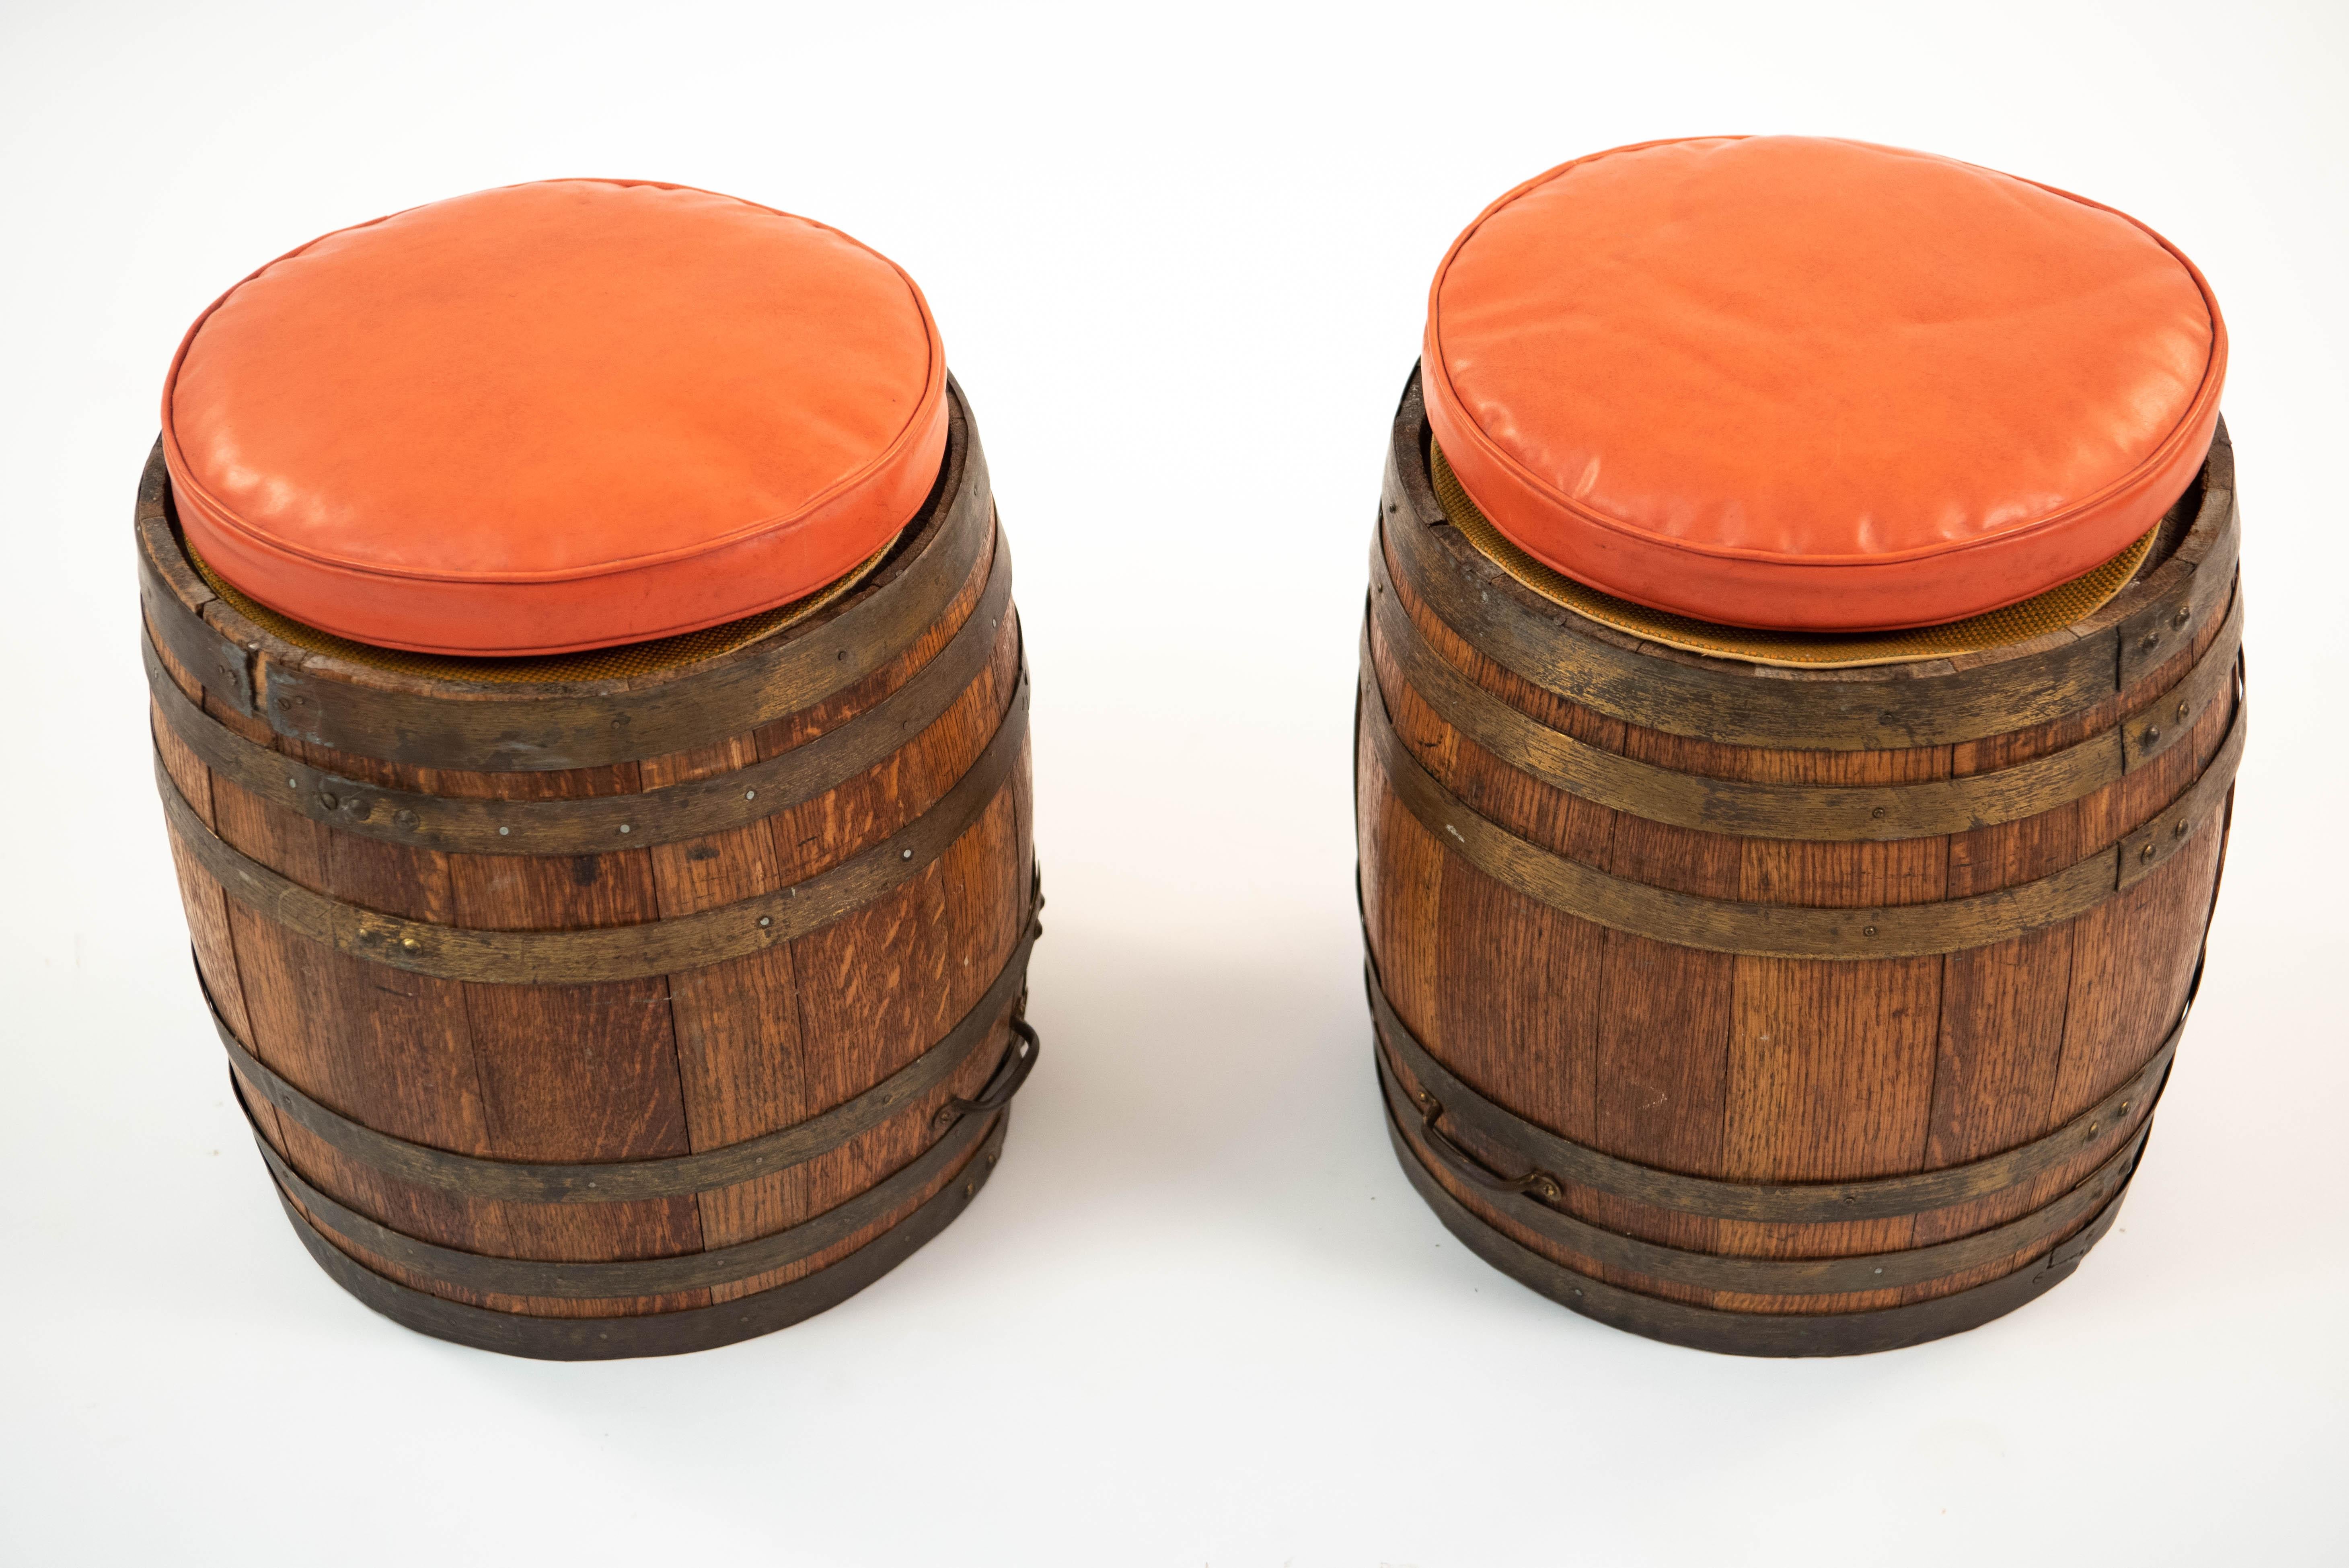 This charming pair of barrel shaped stools brings a rustic element to an interior. By Old Hickory Furniture Company. Label under seat cushion.